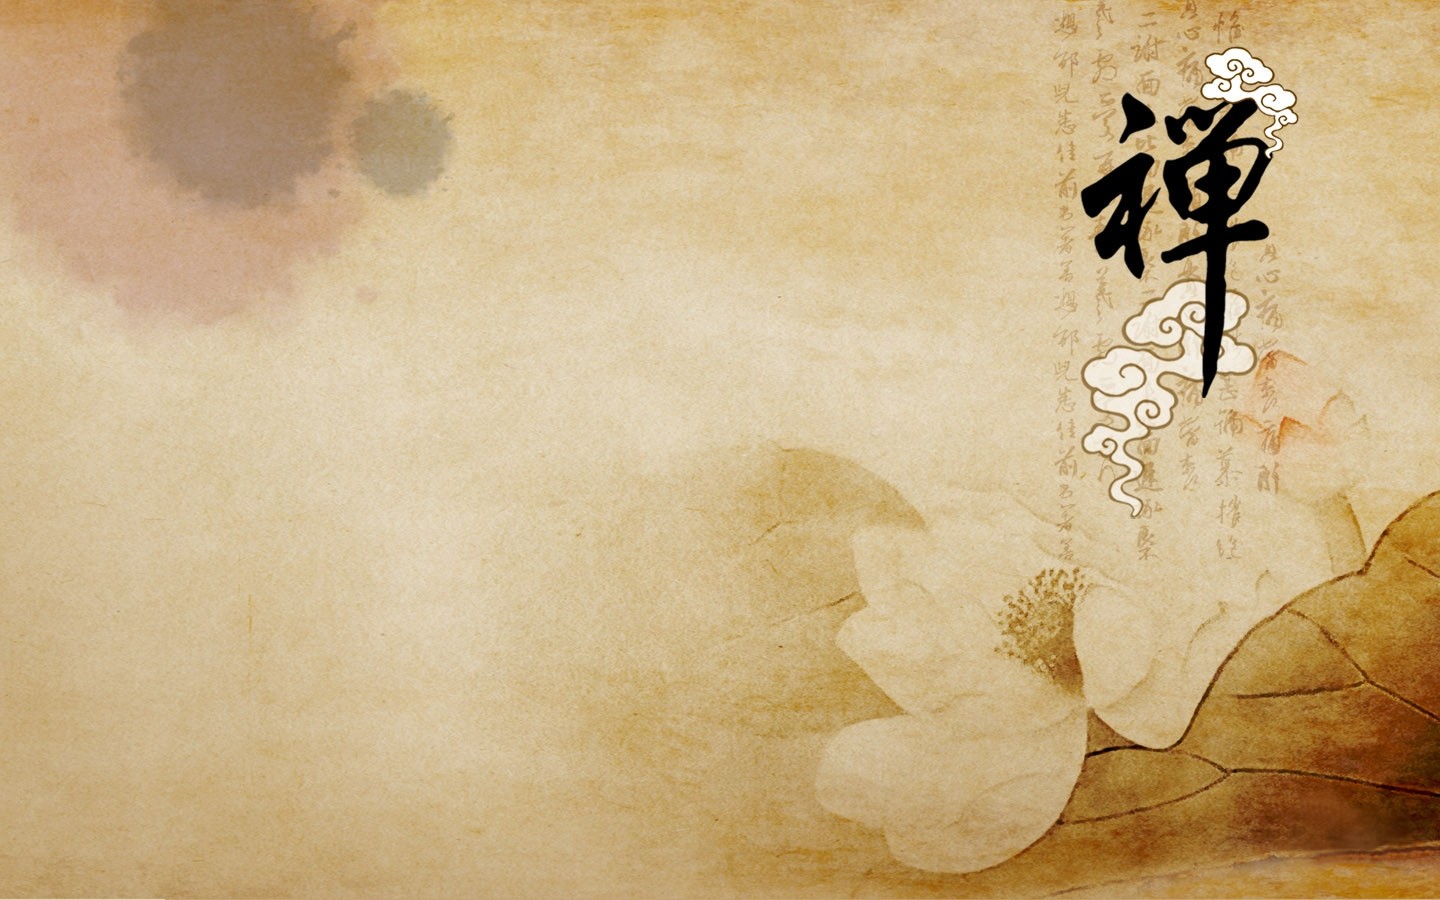 General 1440x900 artwork Asia simple background